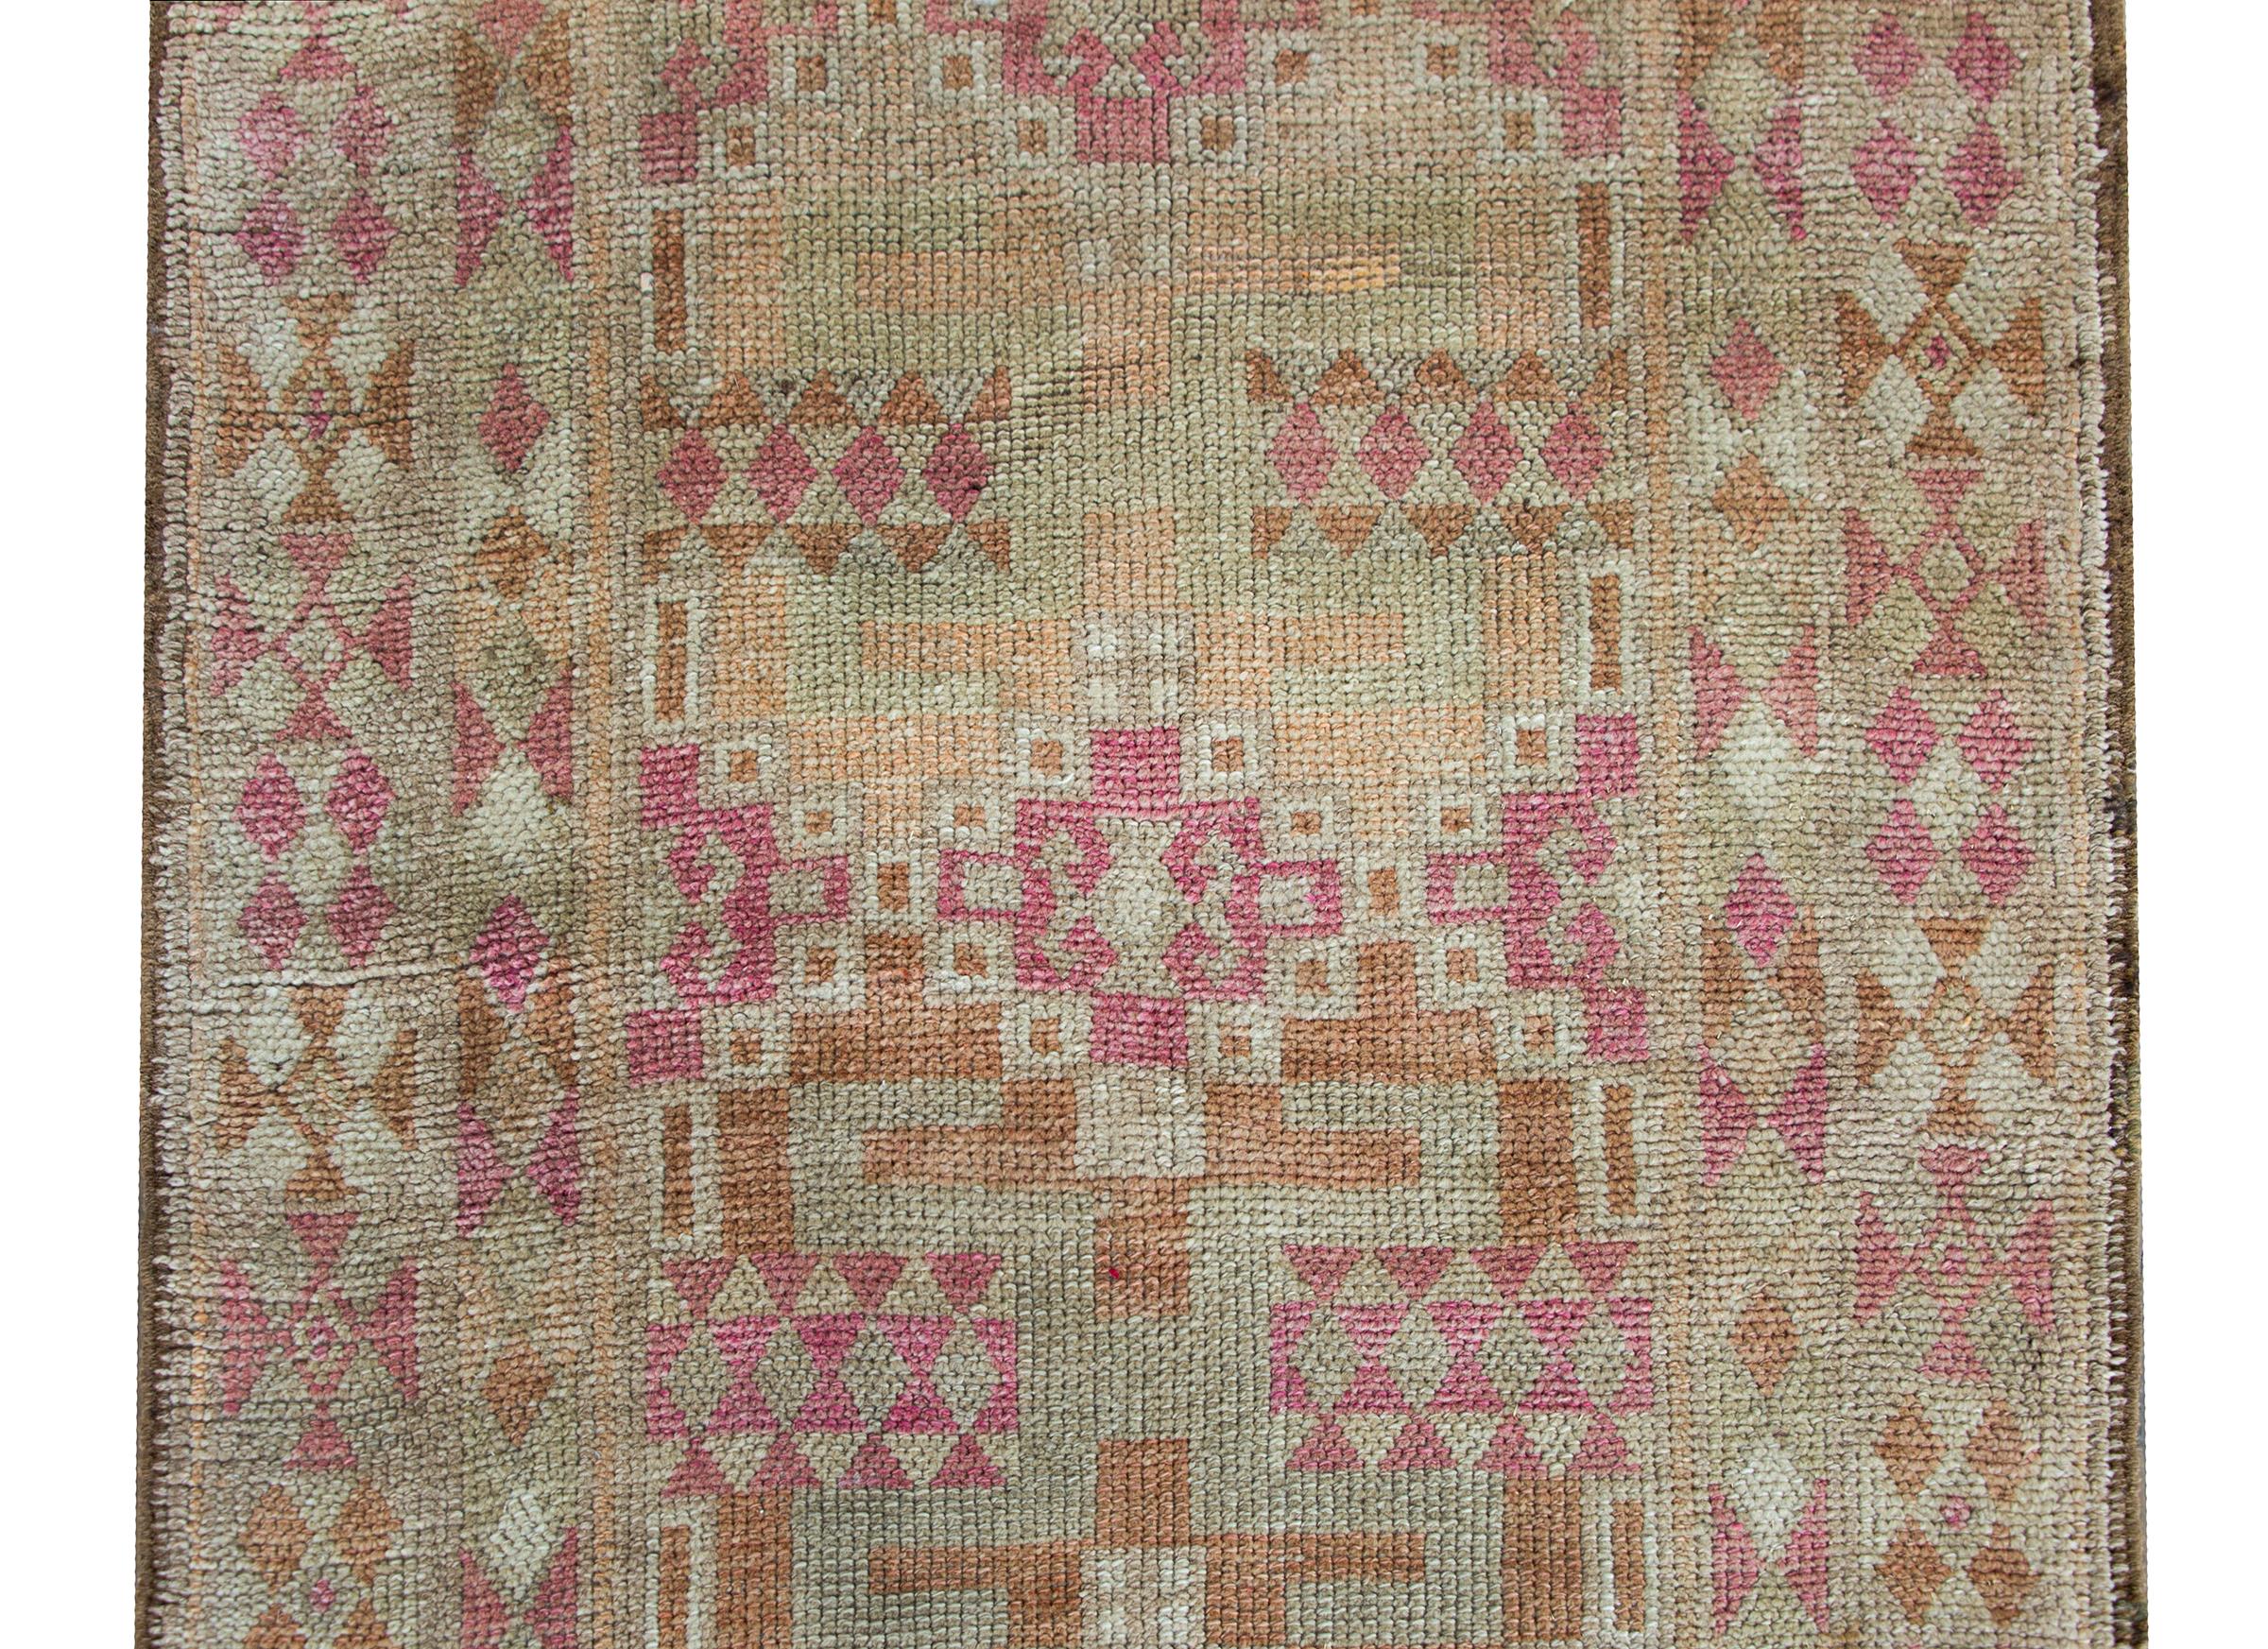 A simple yet chic Mid-20th Century Turkish Oushak rug with an all-over geometric pattern woven in muted pinks, golds, oranges, and natural colored wools, and all surrounded by a border of even more geometric patterns woven in similar colors and the